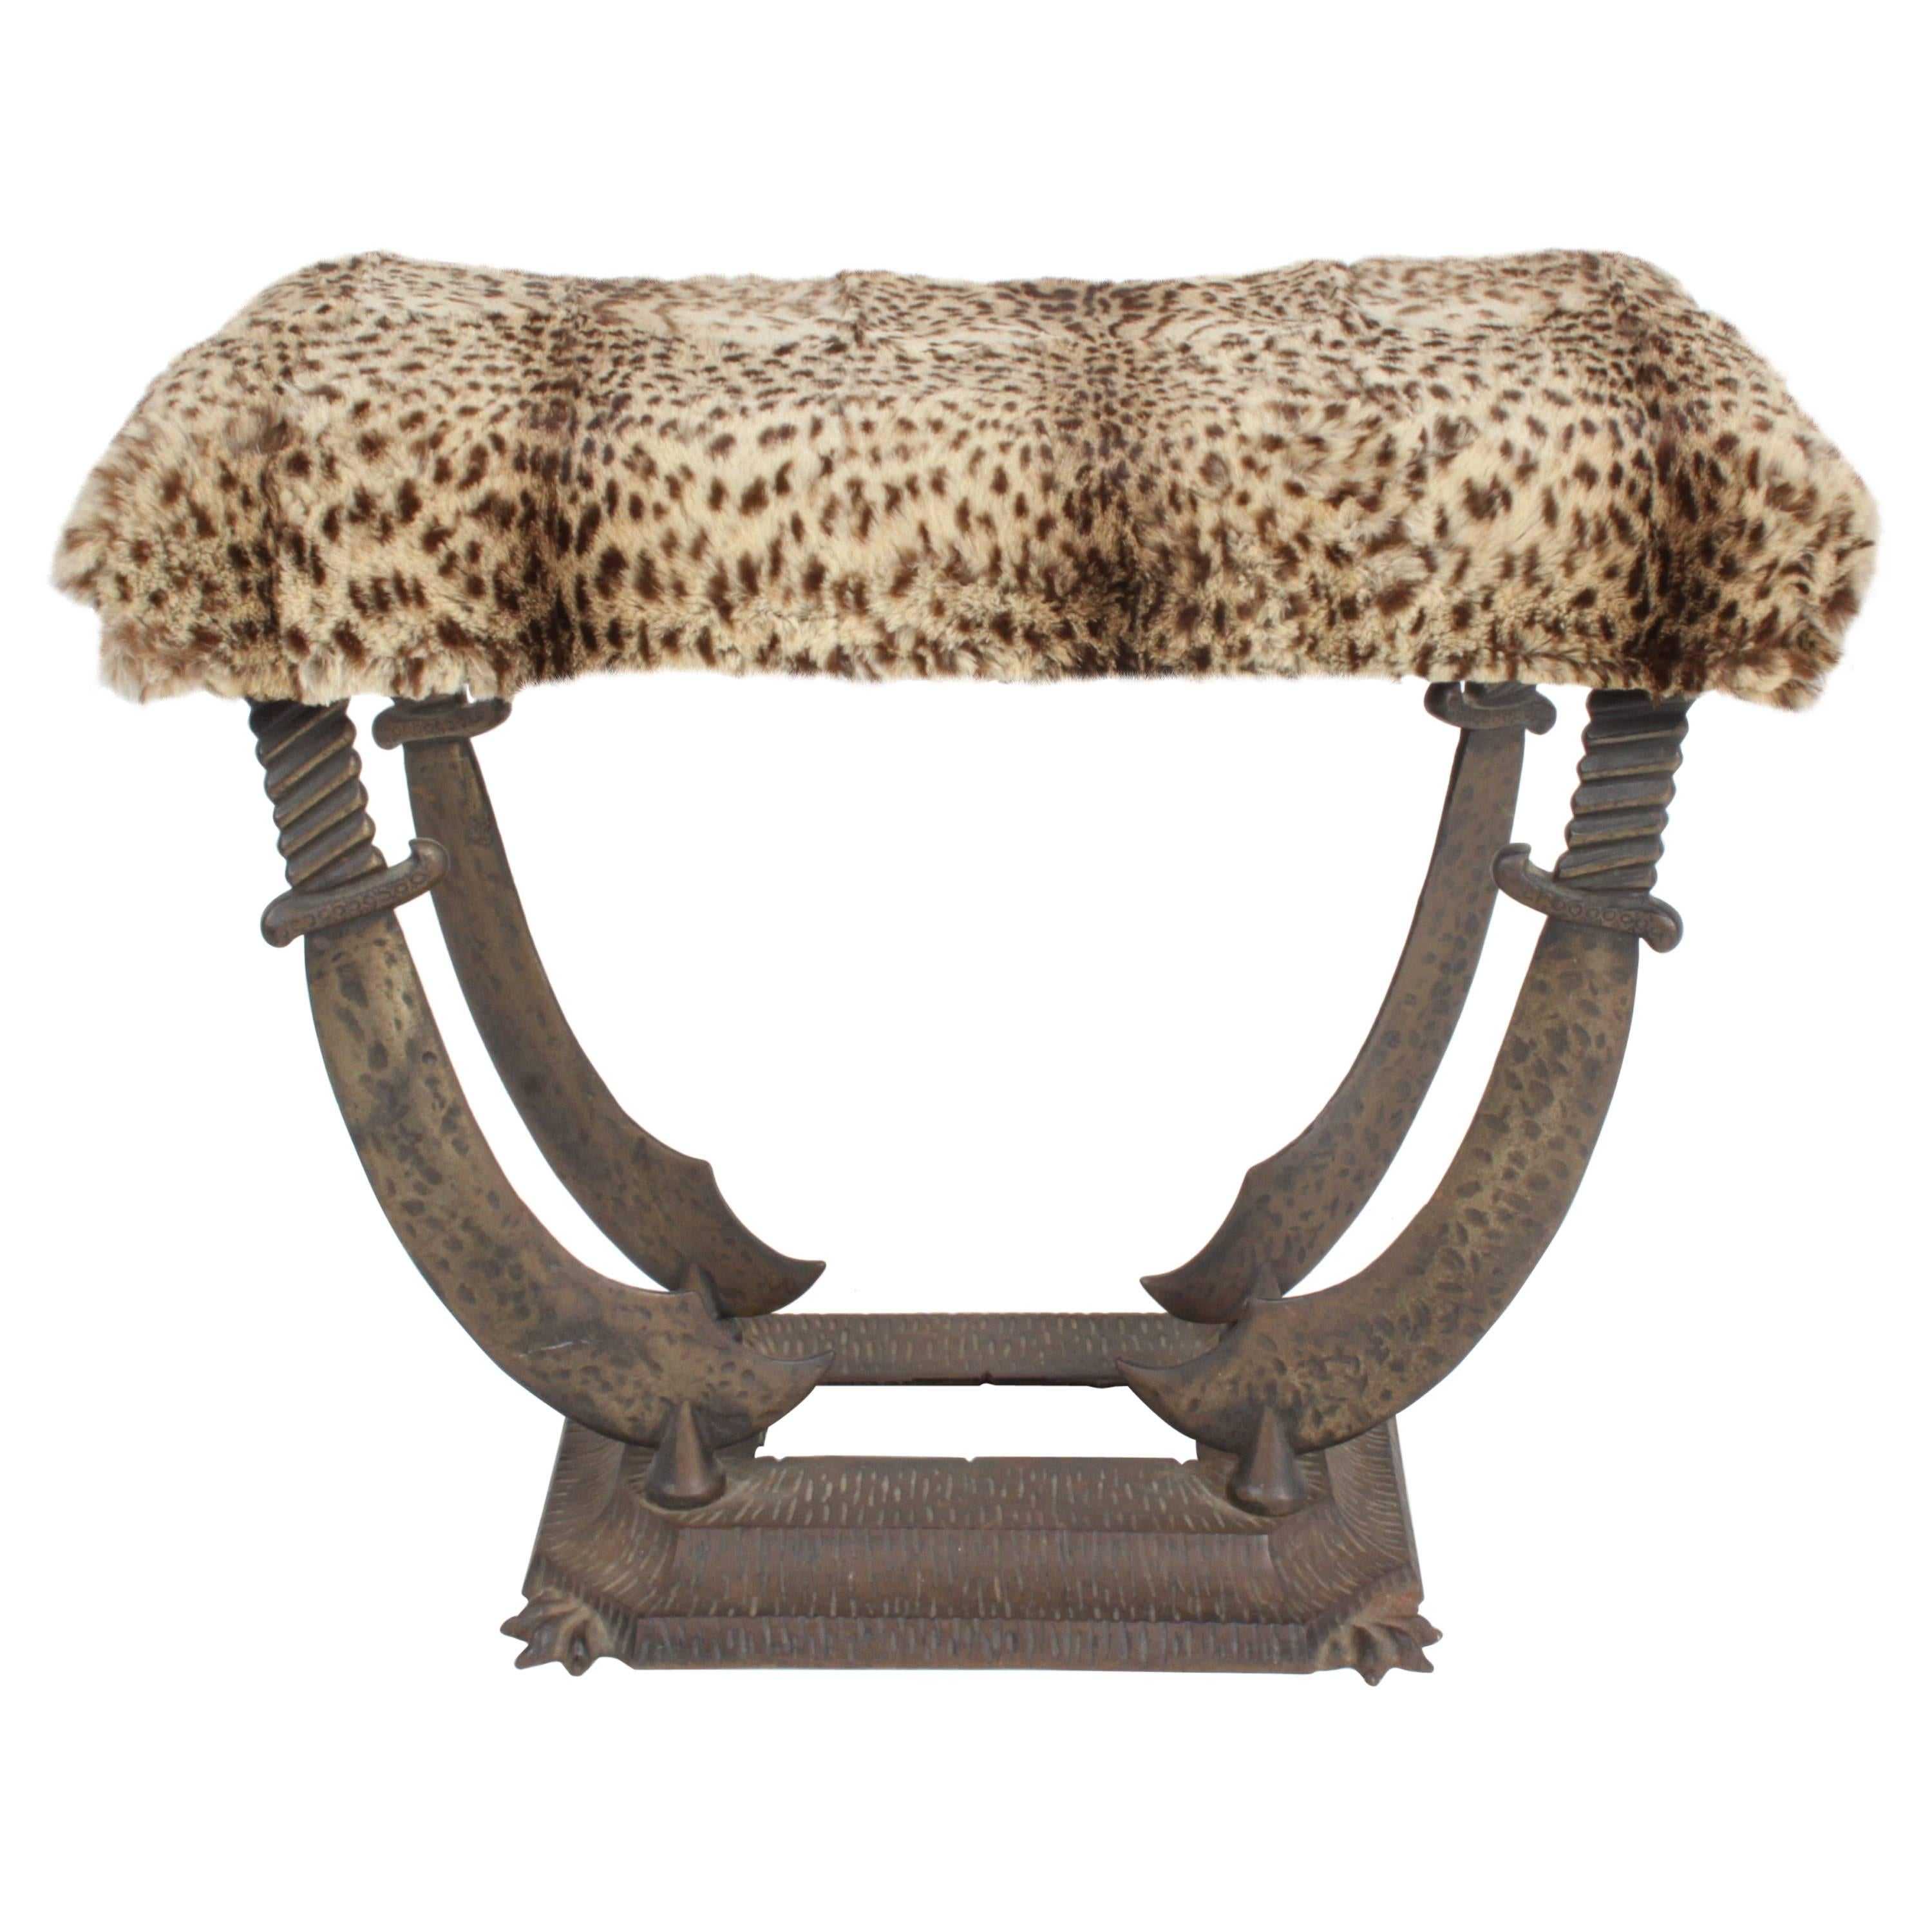 Art Deco Sabre Cast Iron Bench or Stool with Leopard Upholstery by Verona For Sale